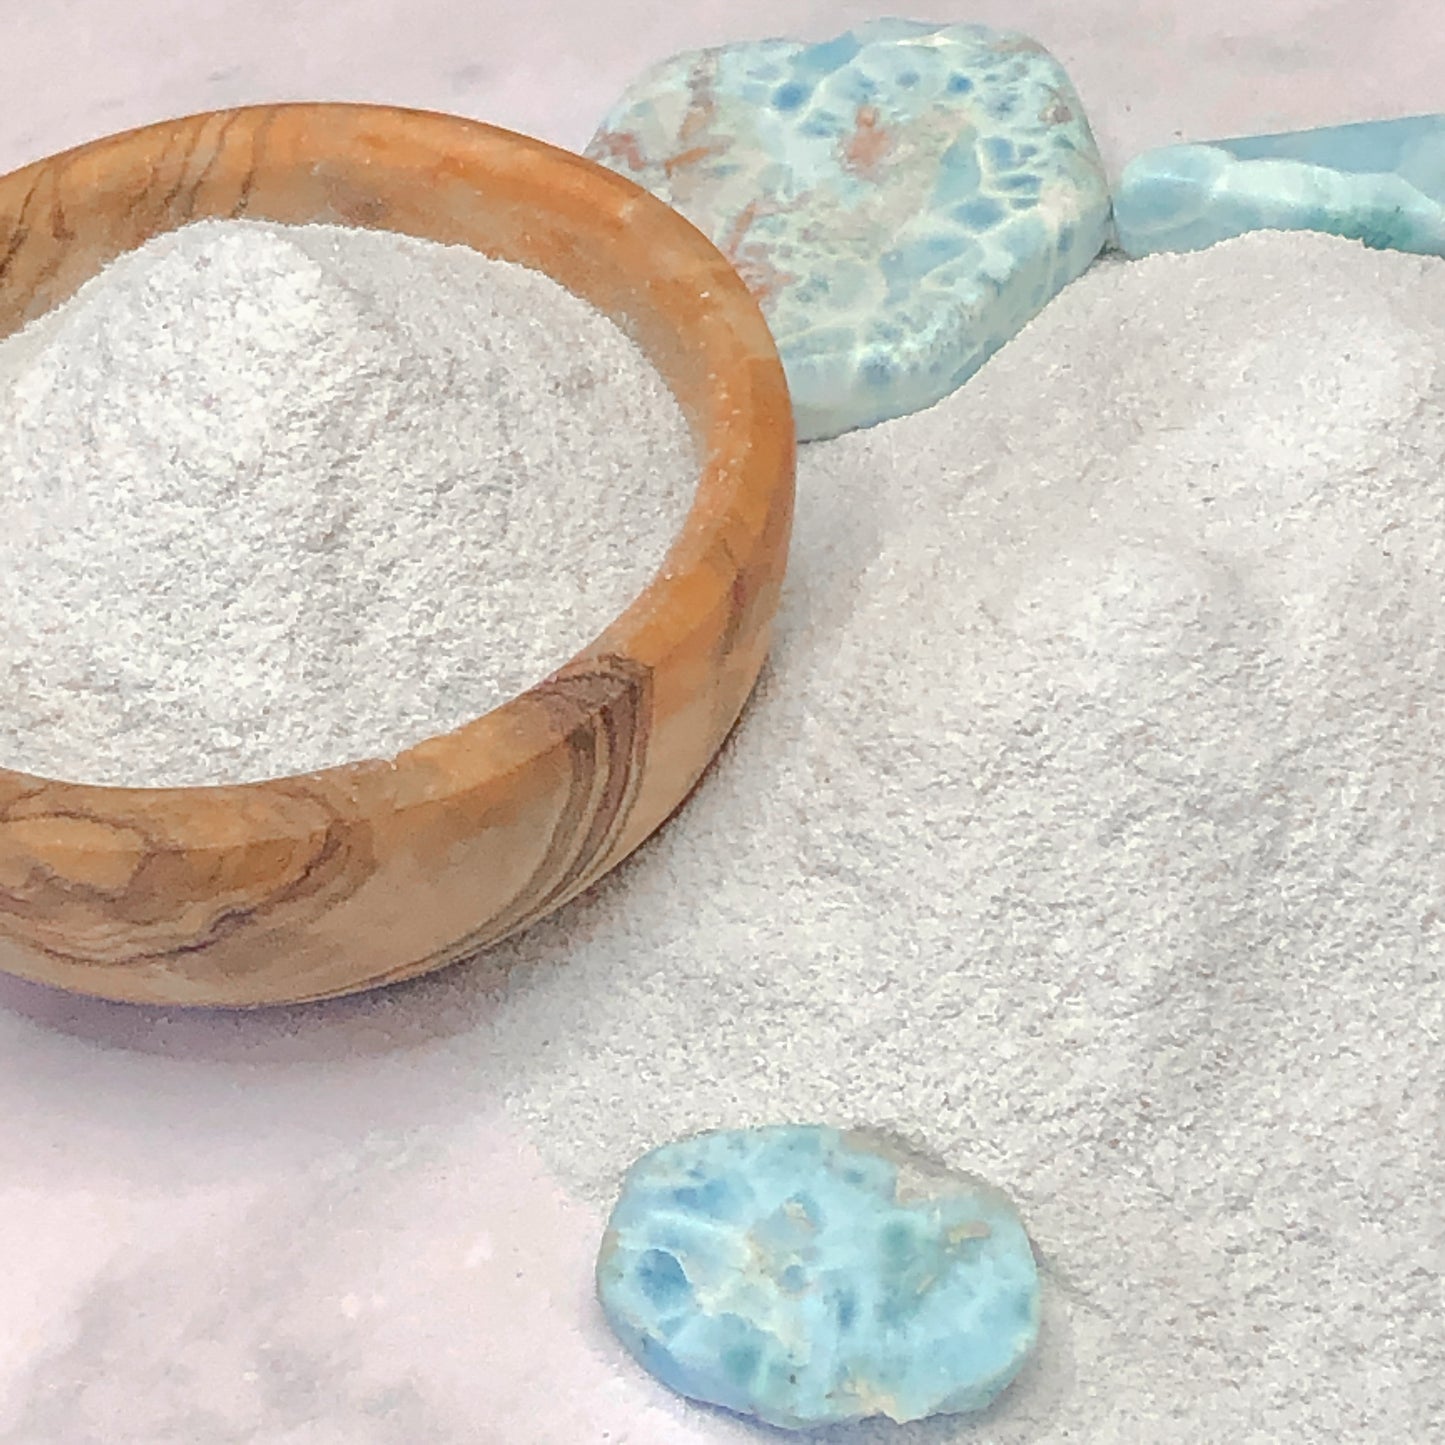 Crushed Baby Blue Larimar (Grade A) from the Dominican Republic, Fine Crush, Powder Size, <0.25mm